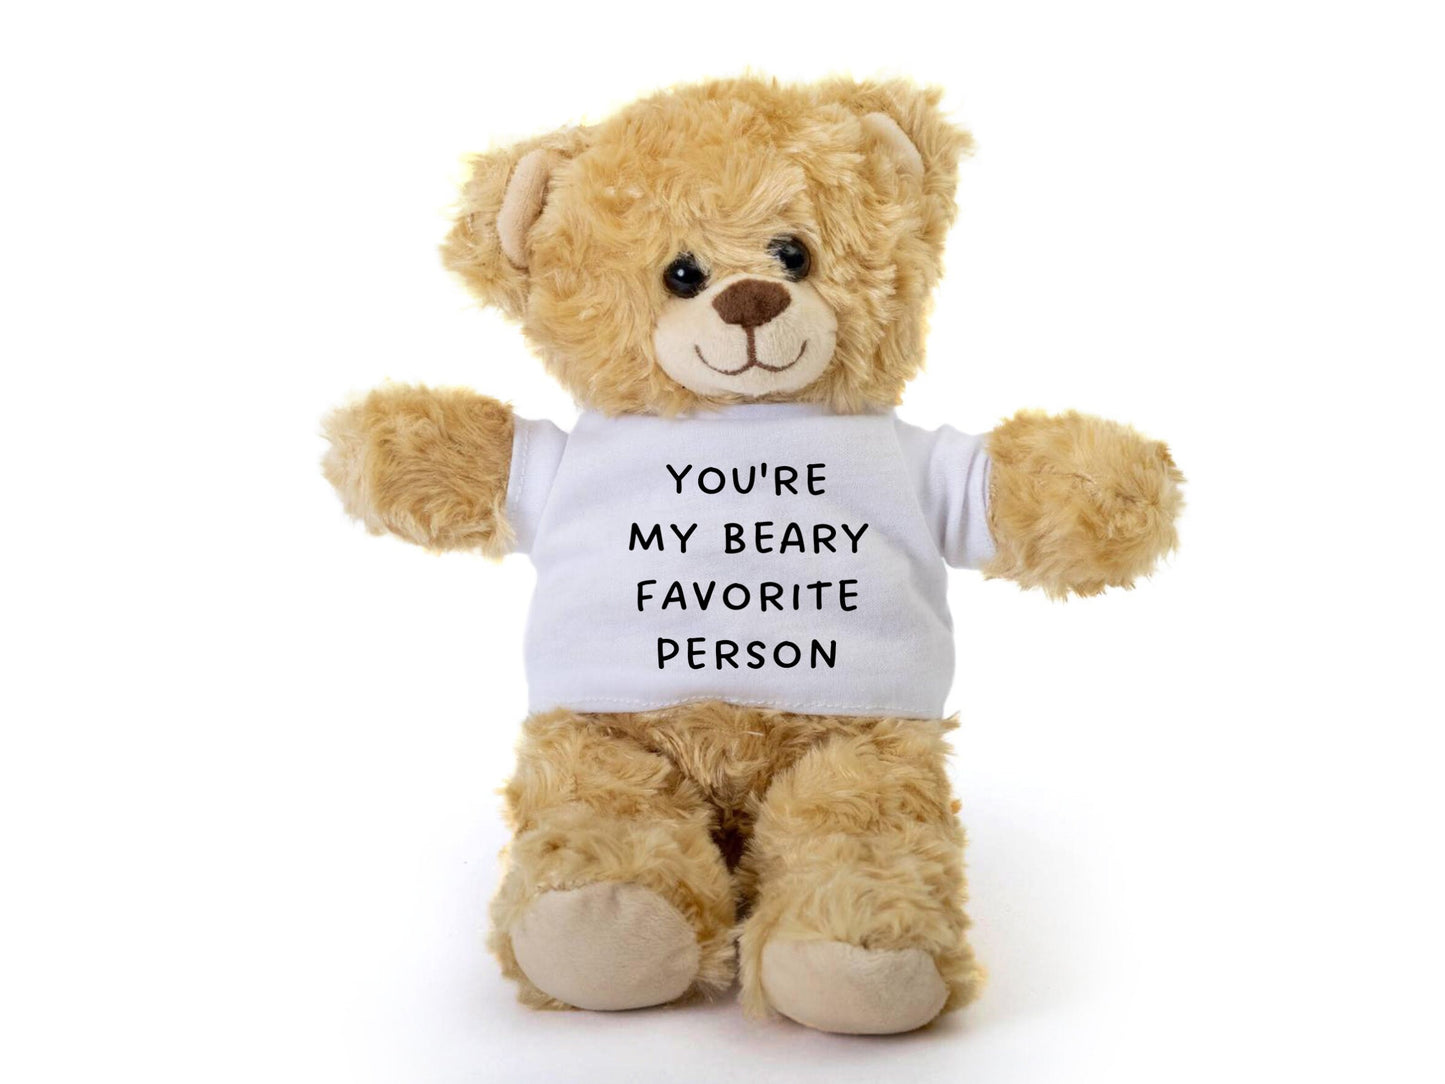 Love Teddy Bear, You're My Beary Favorite Person, Valentines Day Gift Ideas, Custom Teddy Bear, Gift for Girlfriend, Gift for Boyfriend